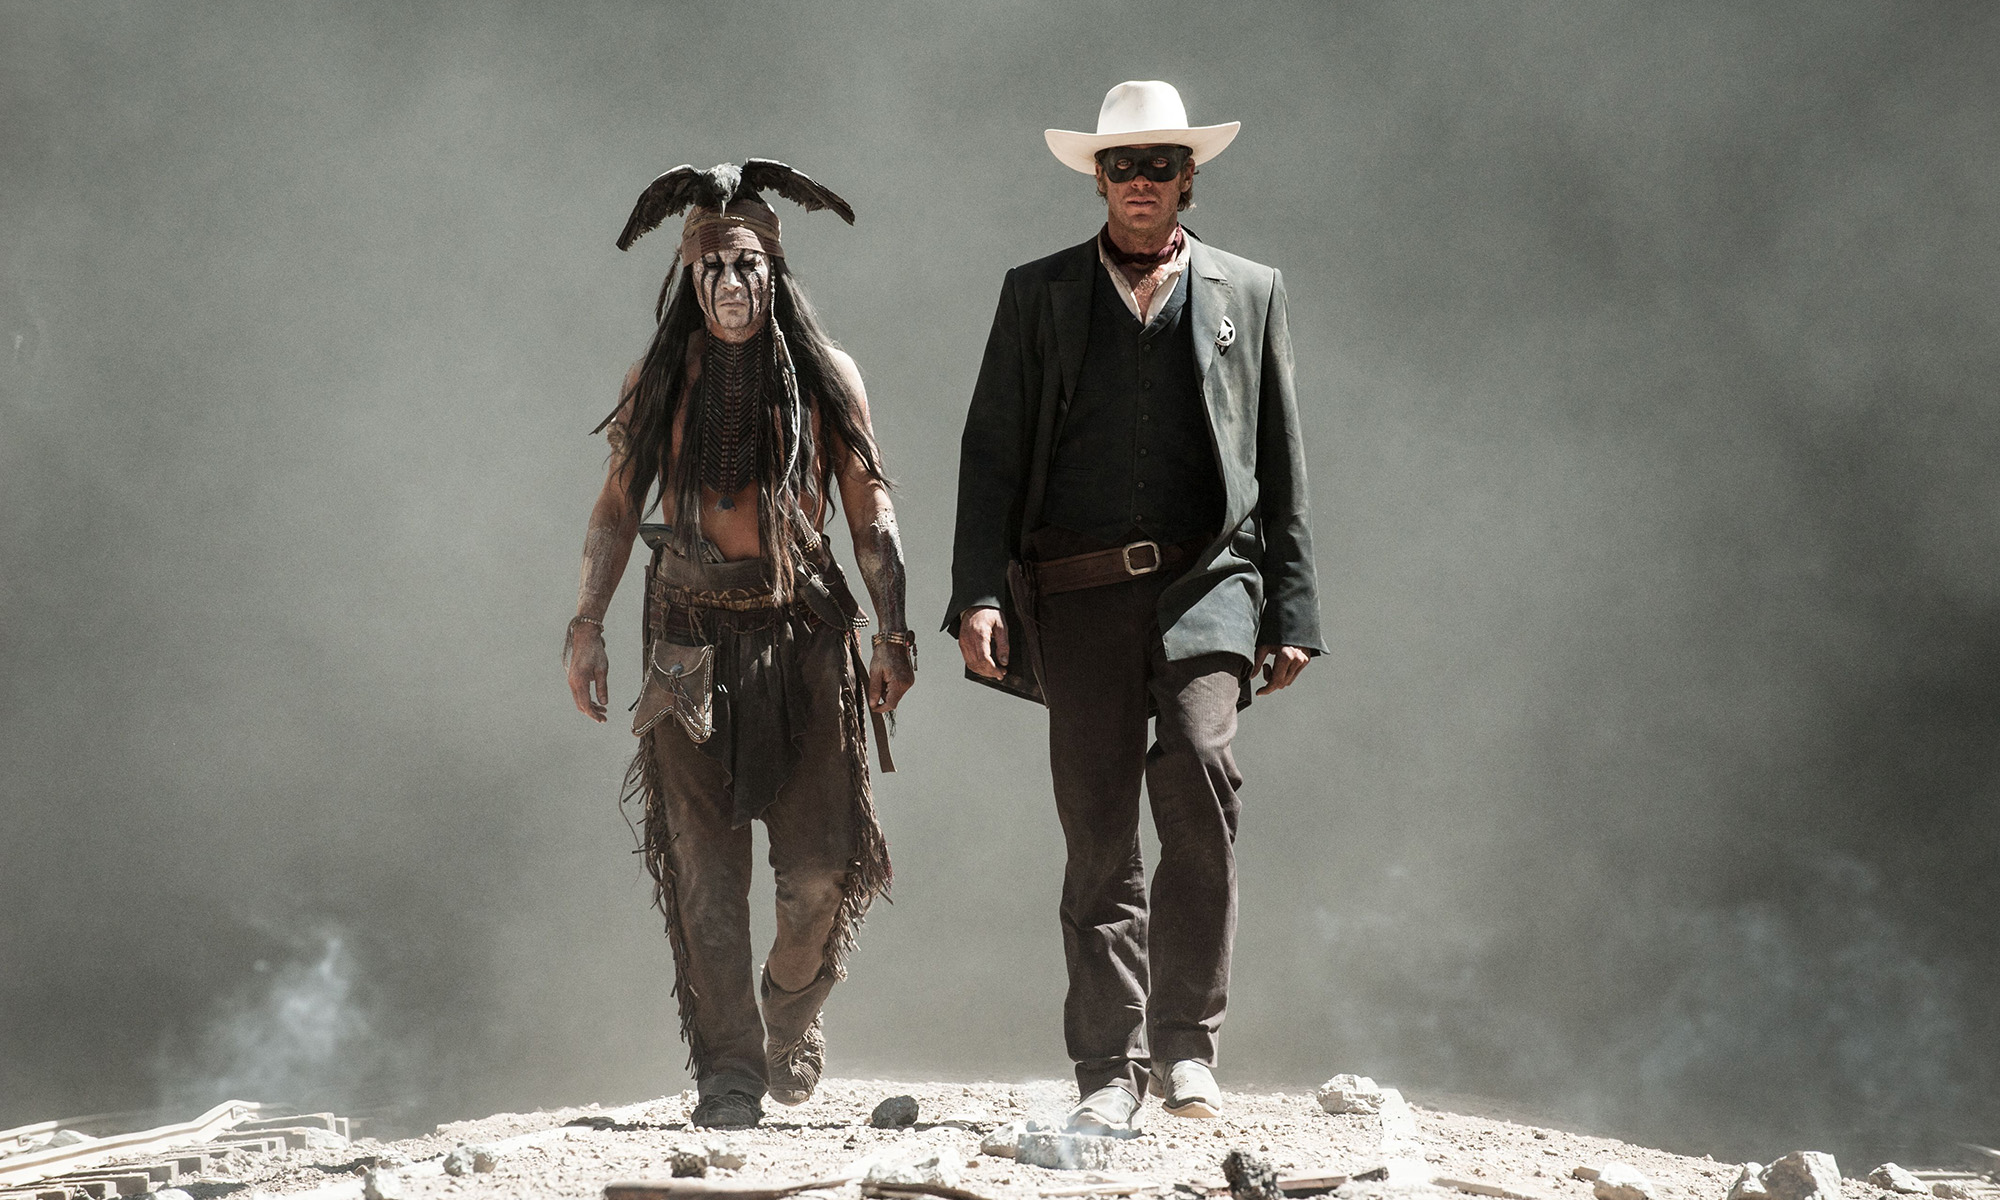 Tonto and the Lone Ranger walking in 2013 film